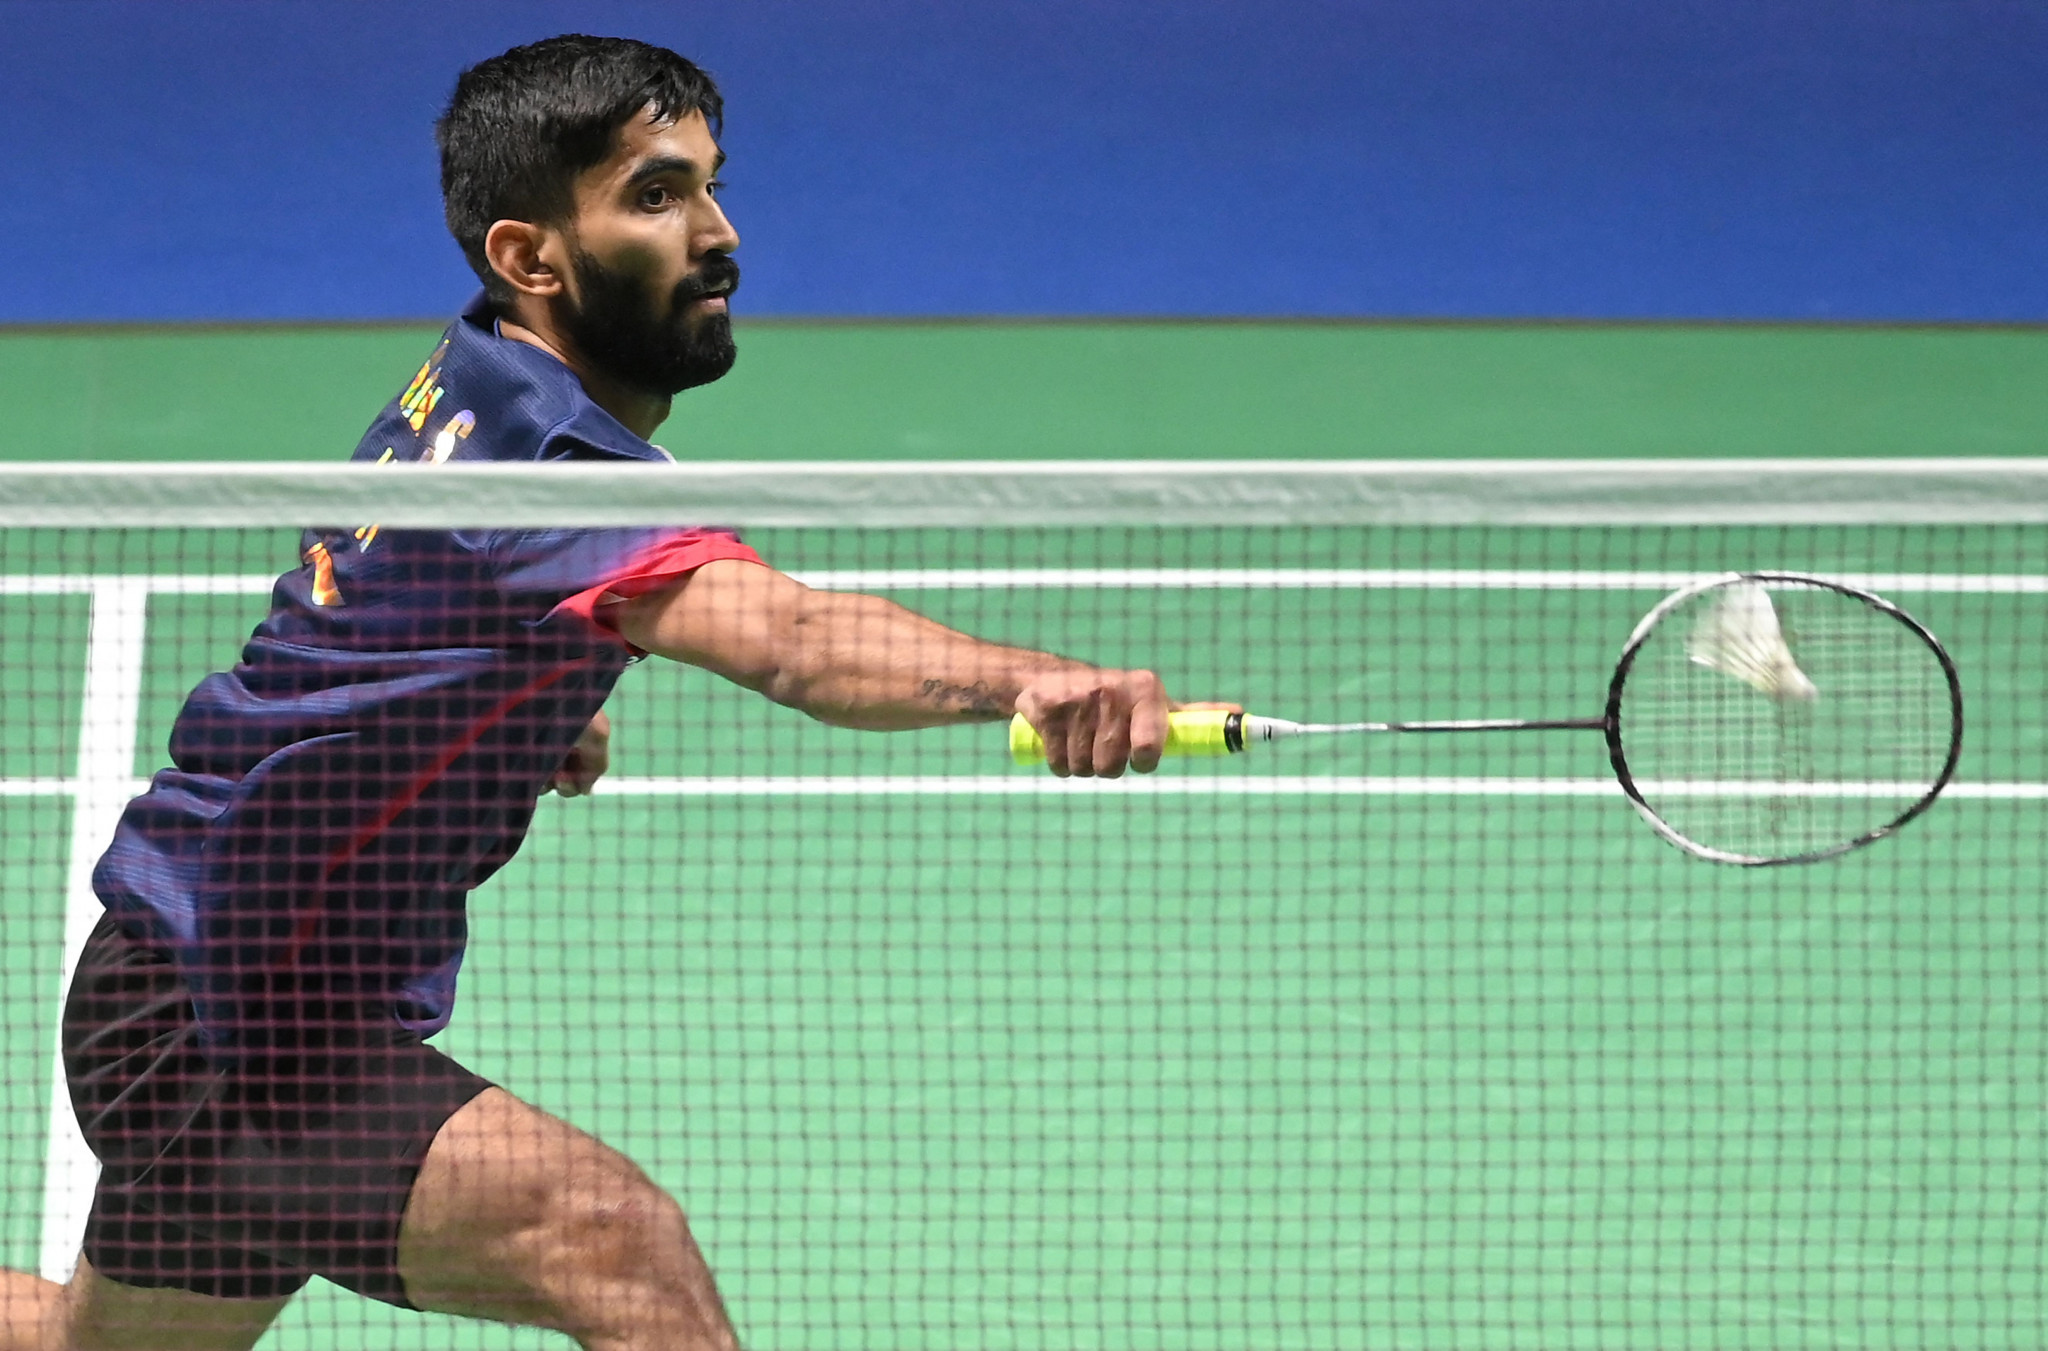 Kidambi becomes India's first male finalist at Badminton World Championships